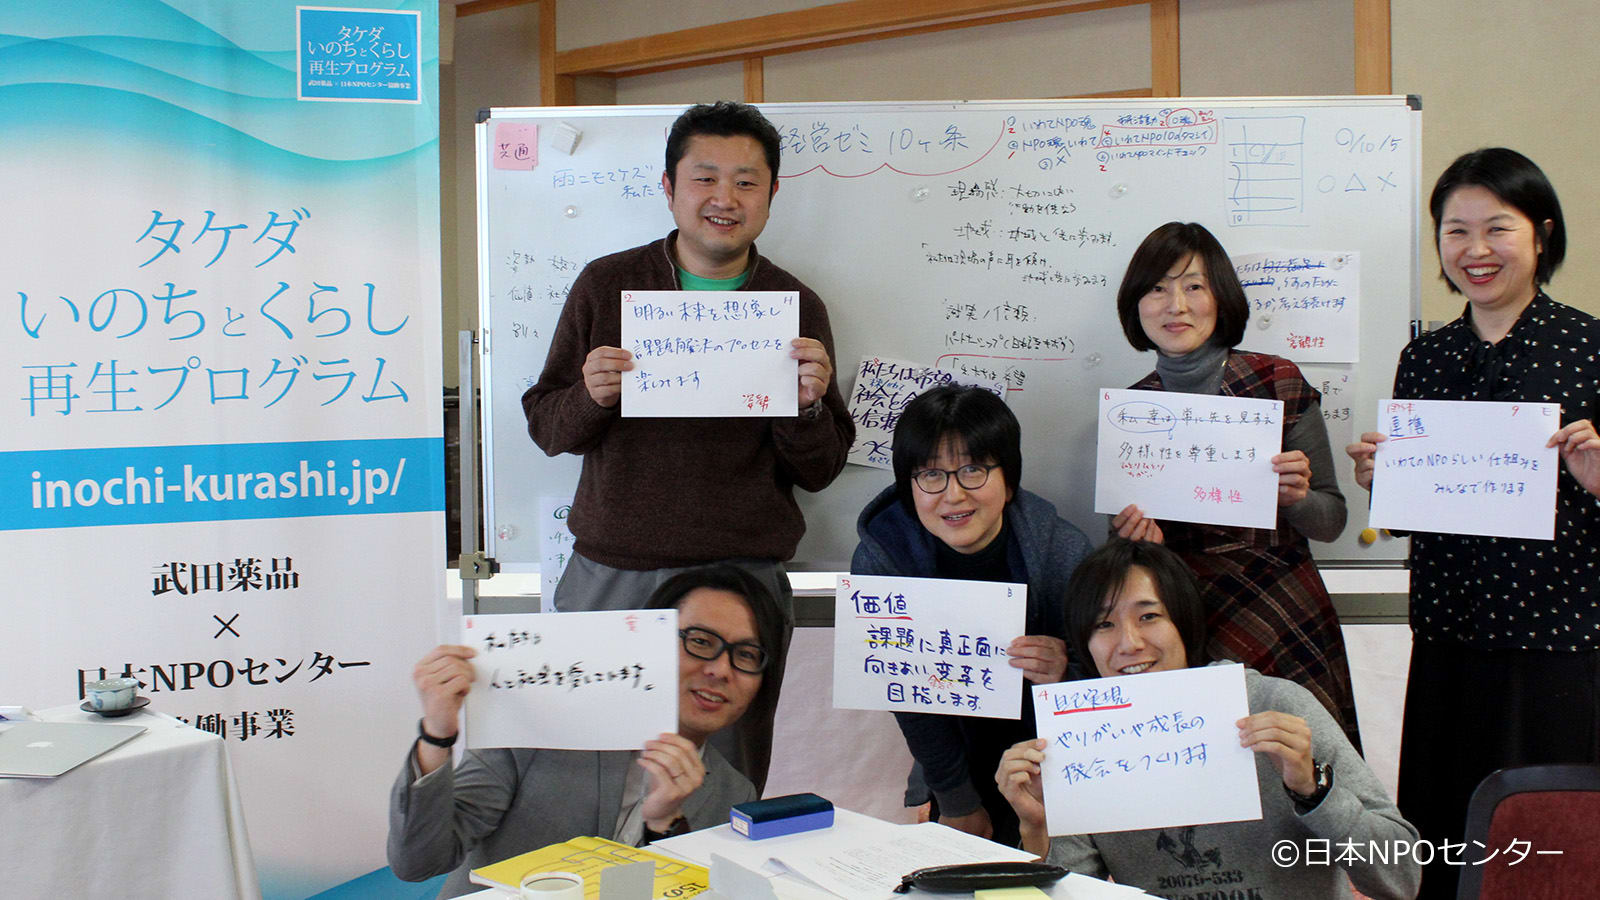 six people showing handwritten signs in a classroom